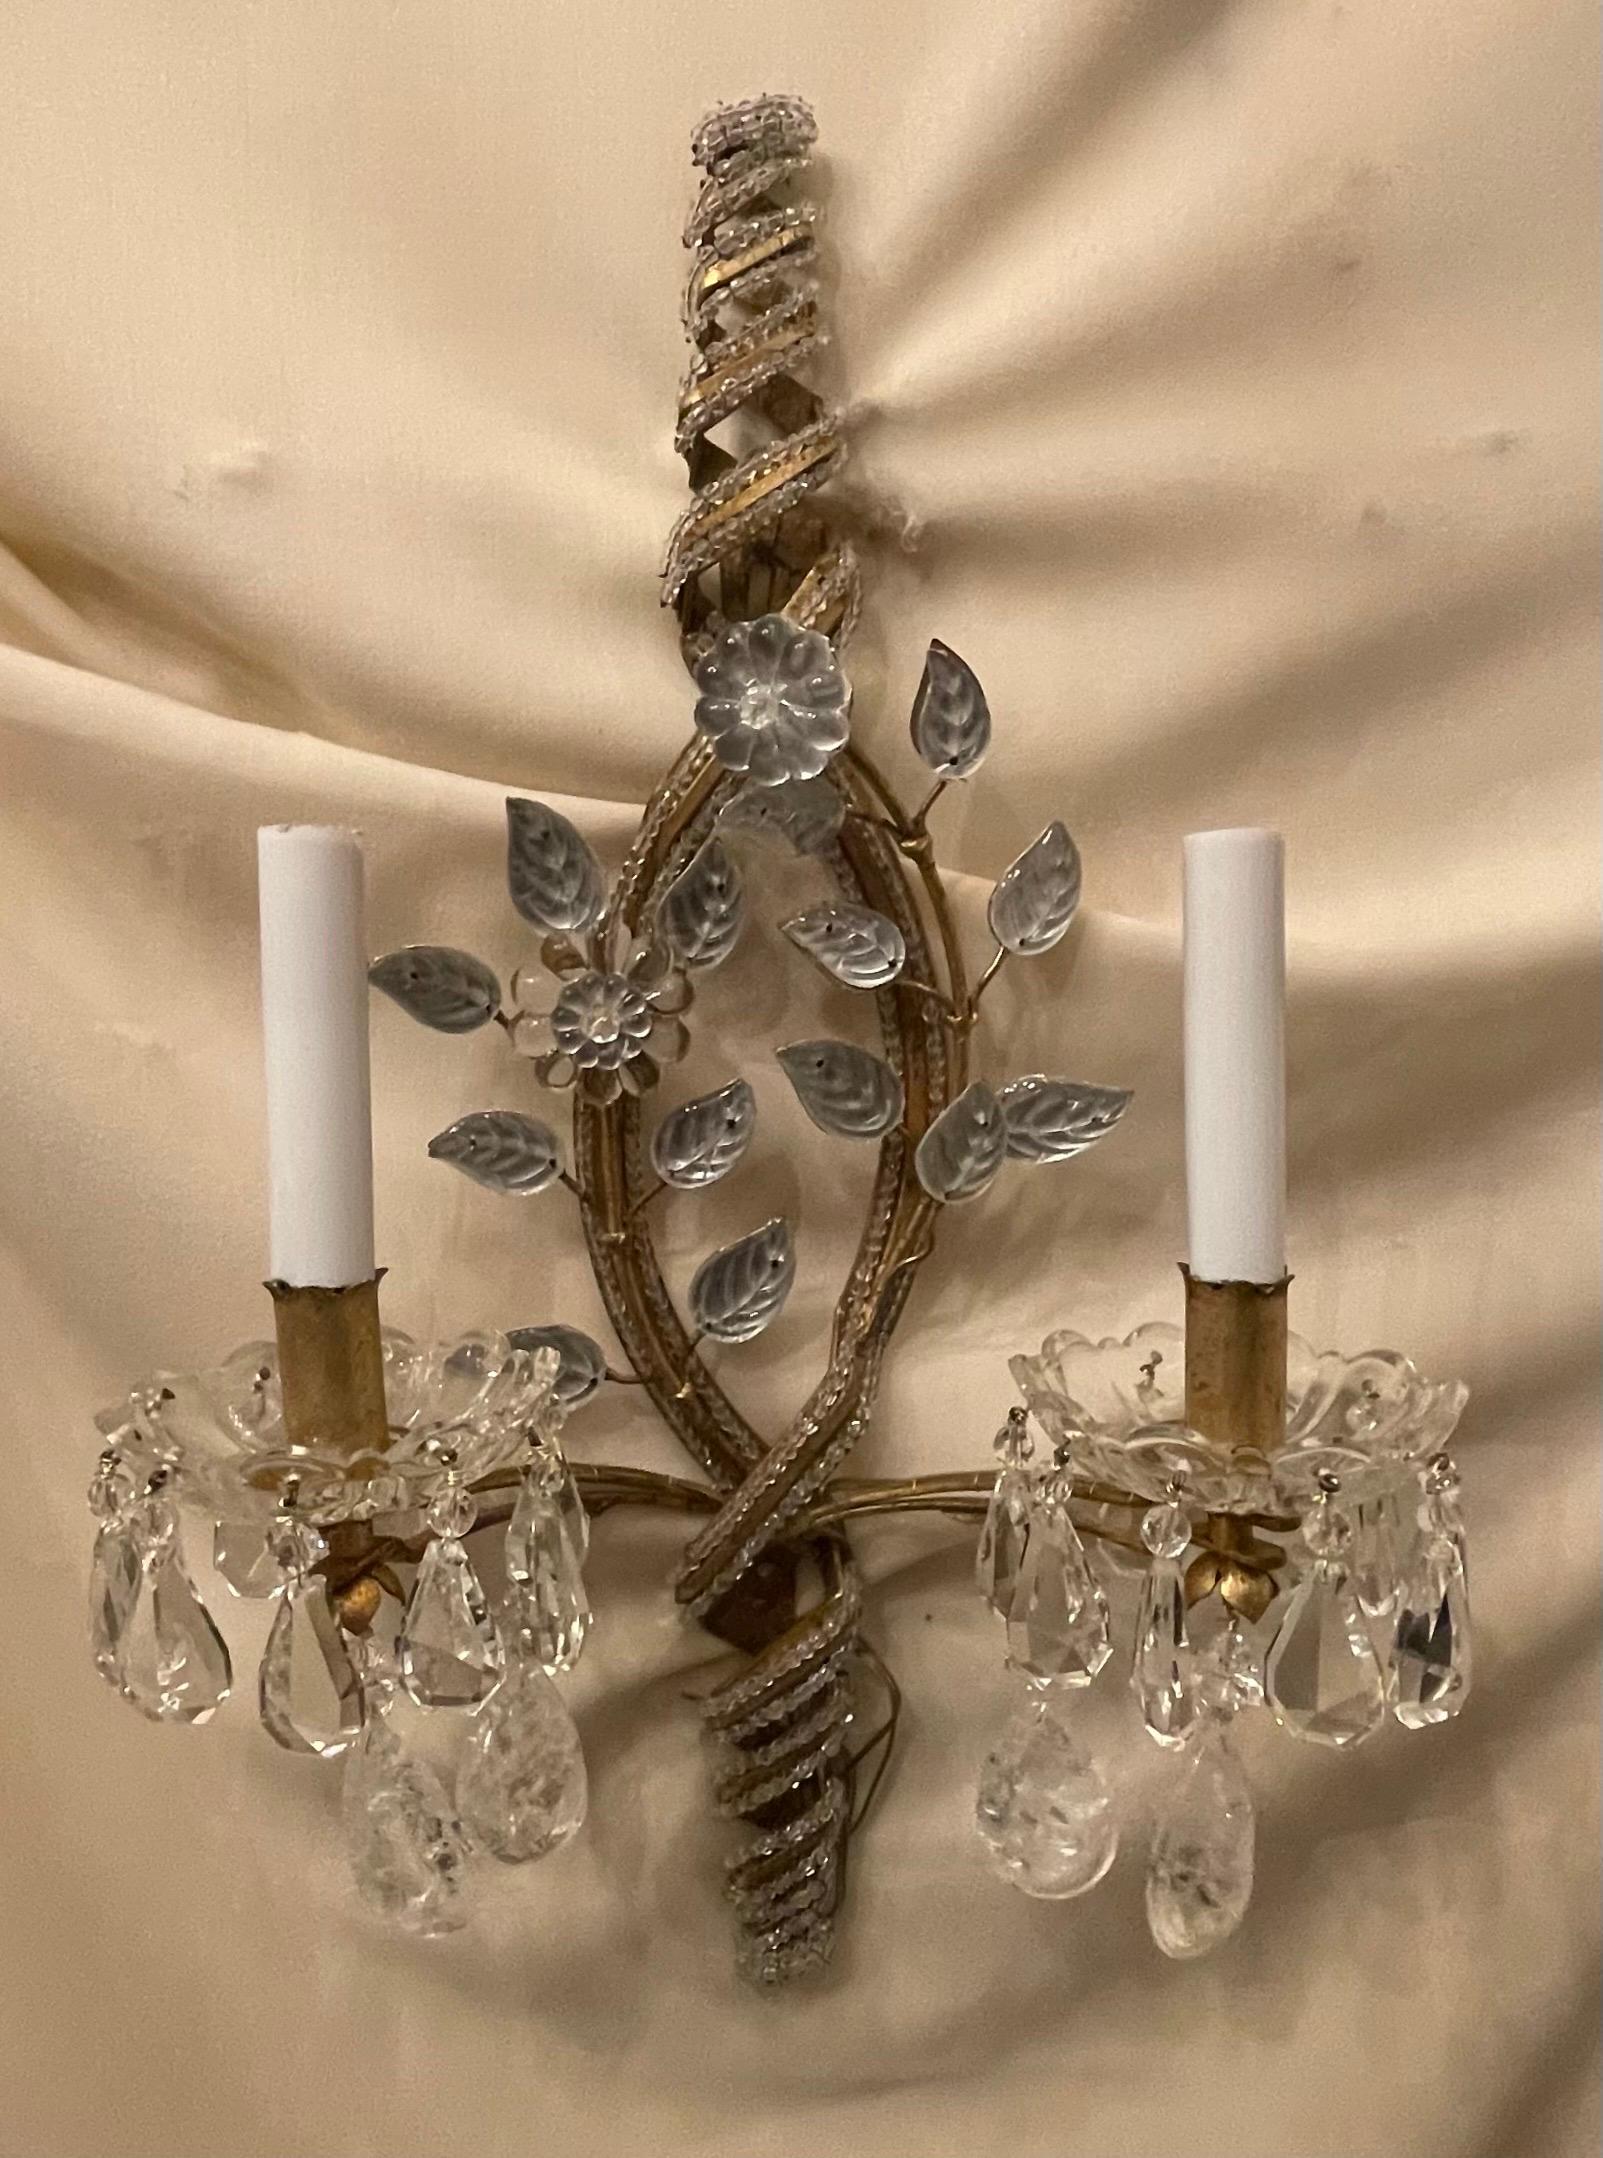 A wonderful pair of gold gilt, rock crystal drop Maison Bagues style sconces with beaded spiral design leading to two candelabra lights situated inside clear cups. The sconces have been rewired with new sockets and come ready to install.